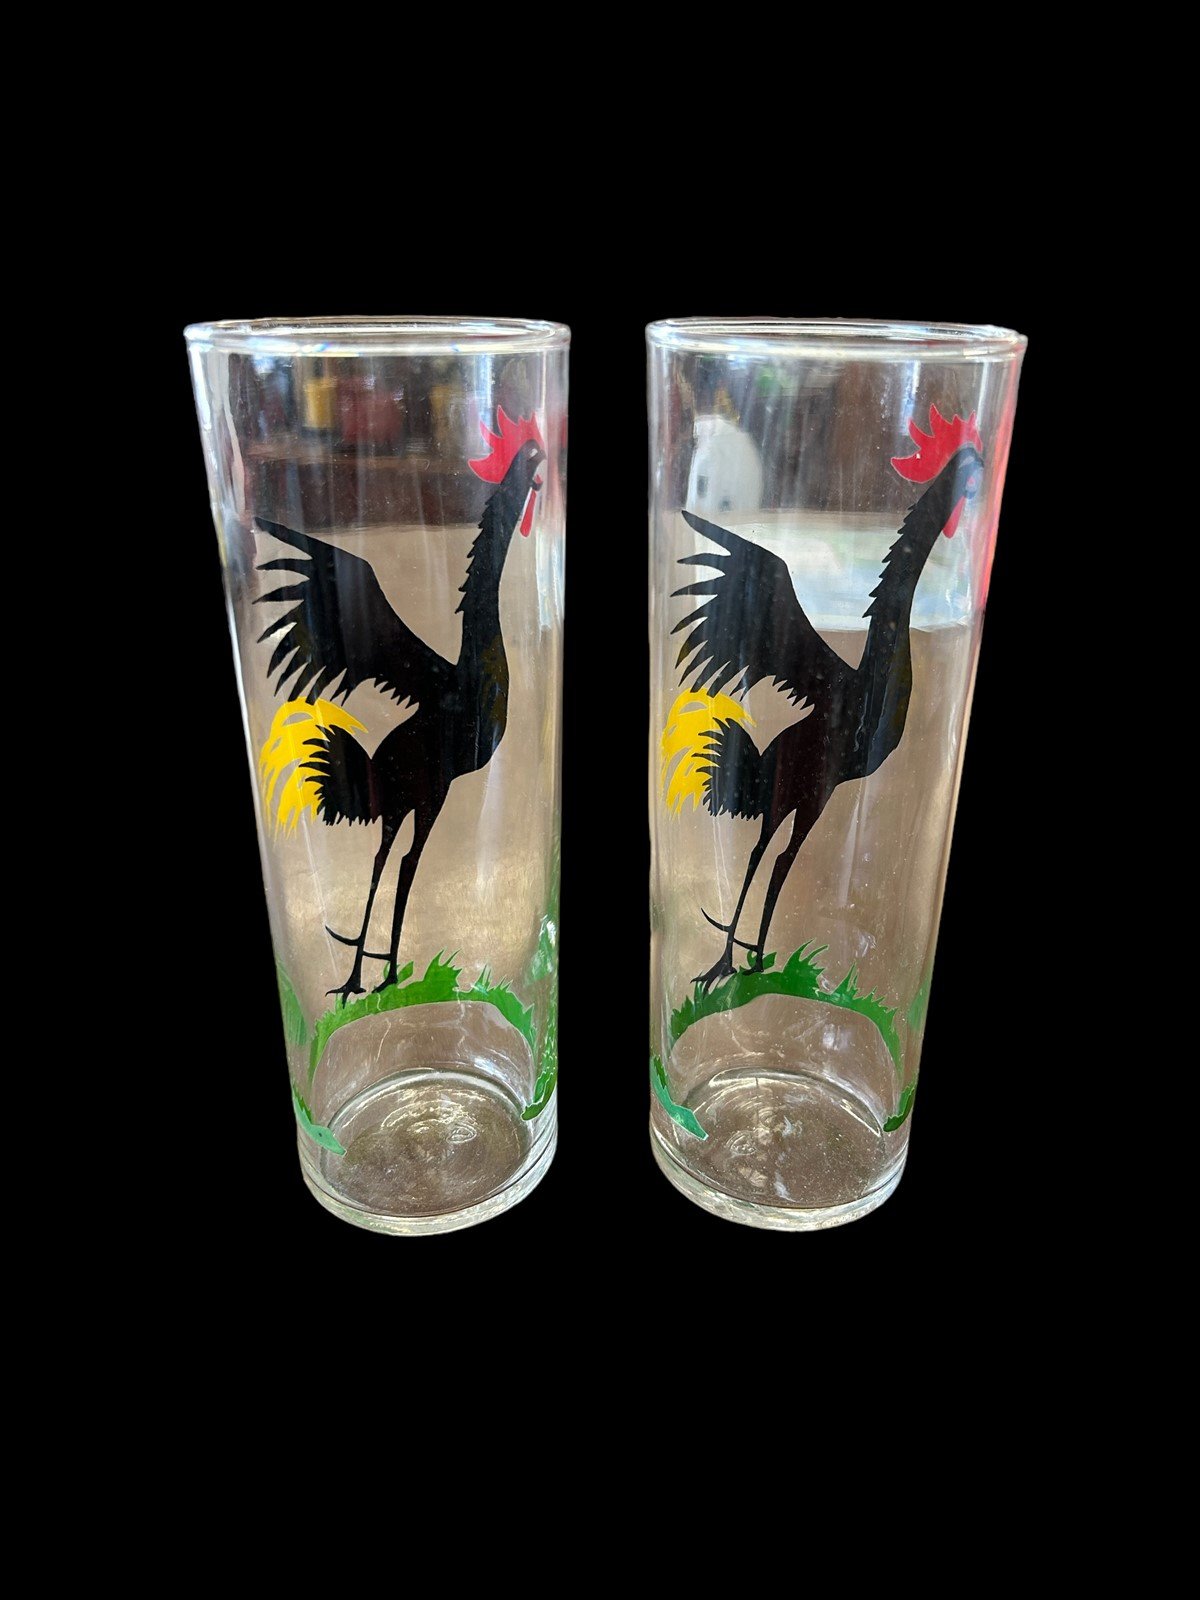 Two Federal Black Crowing Rooster Glasses Tom Collins Cups Cocktail highball